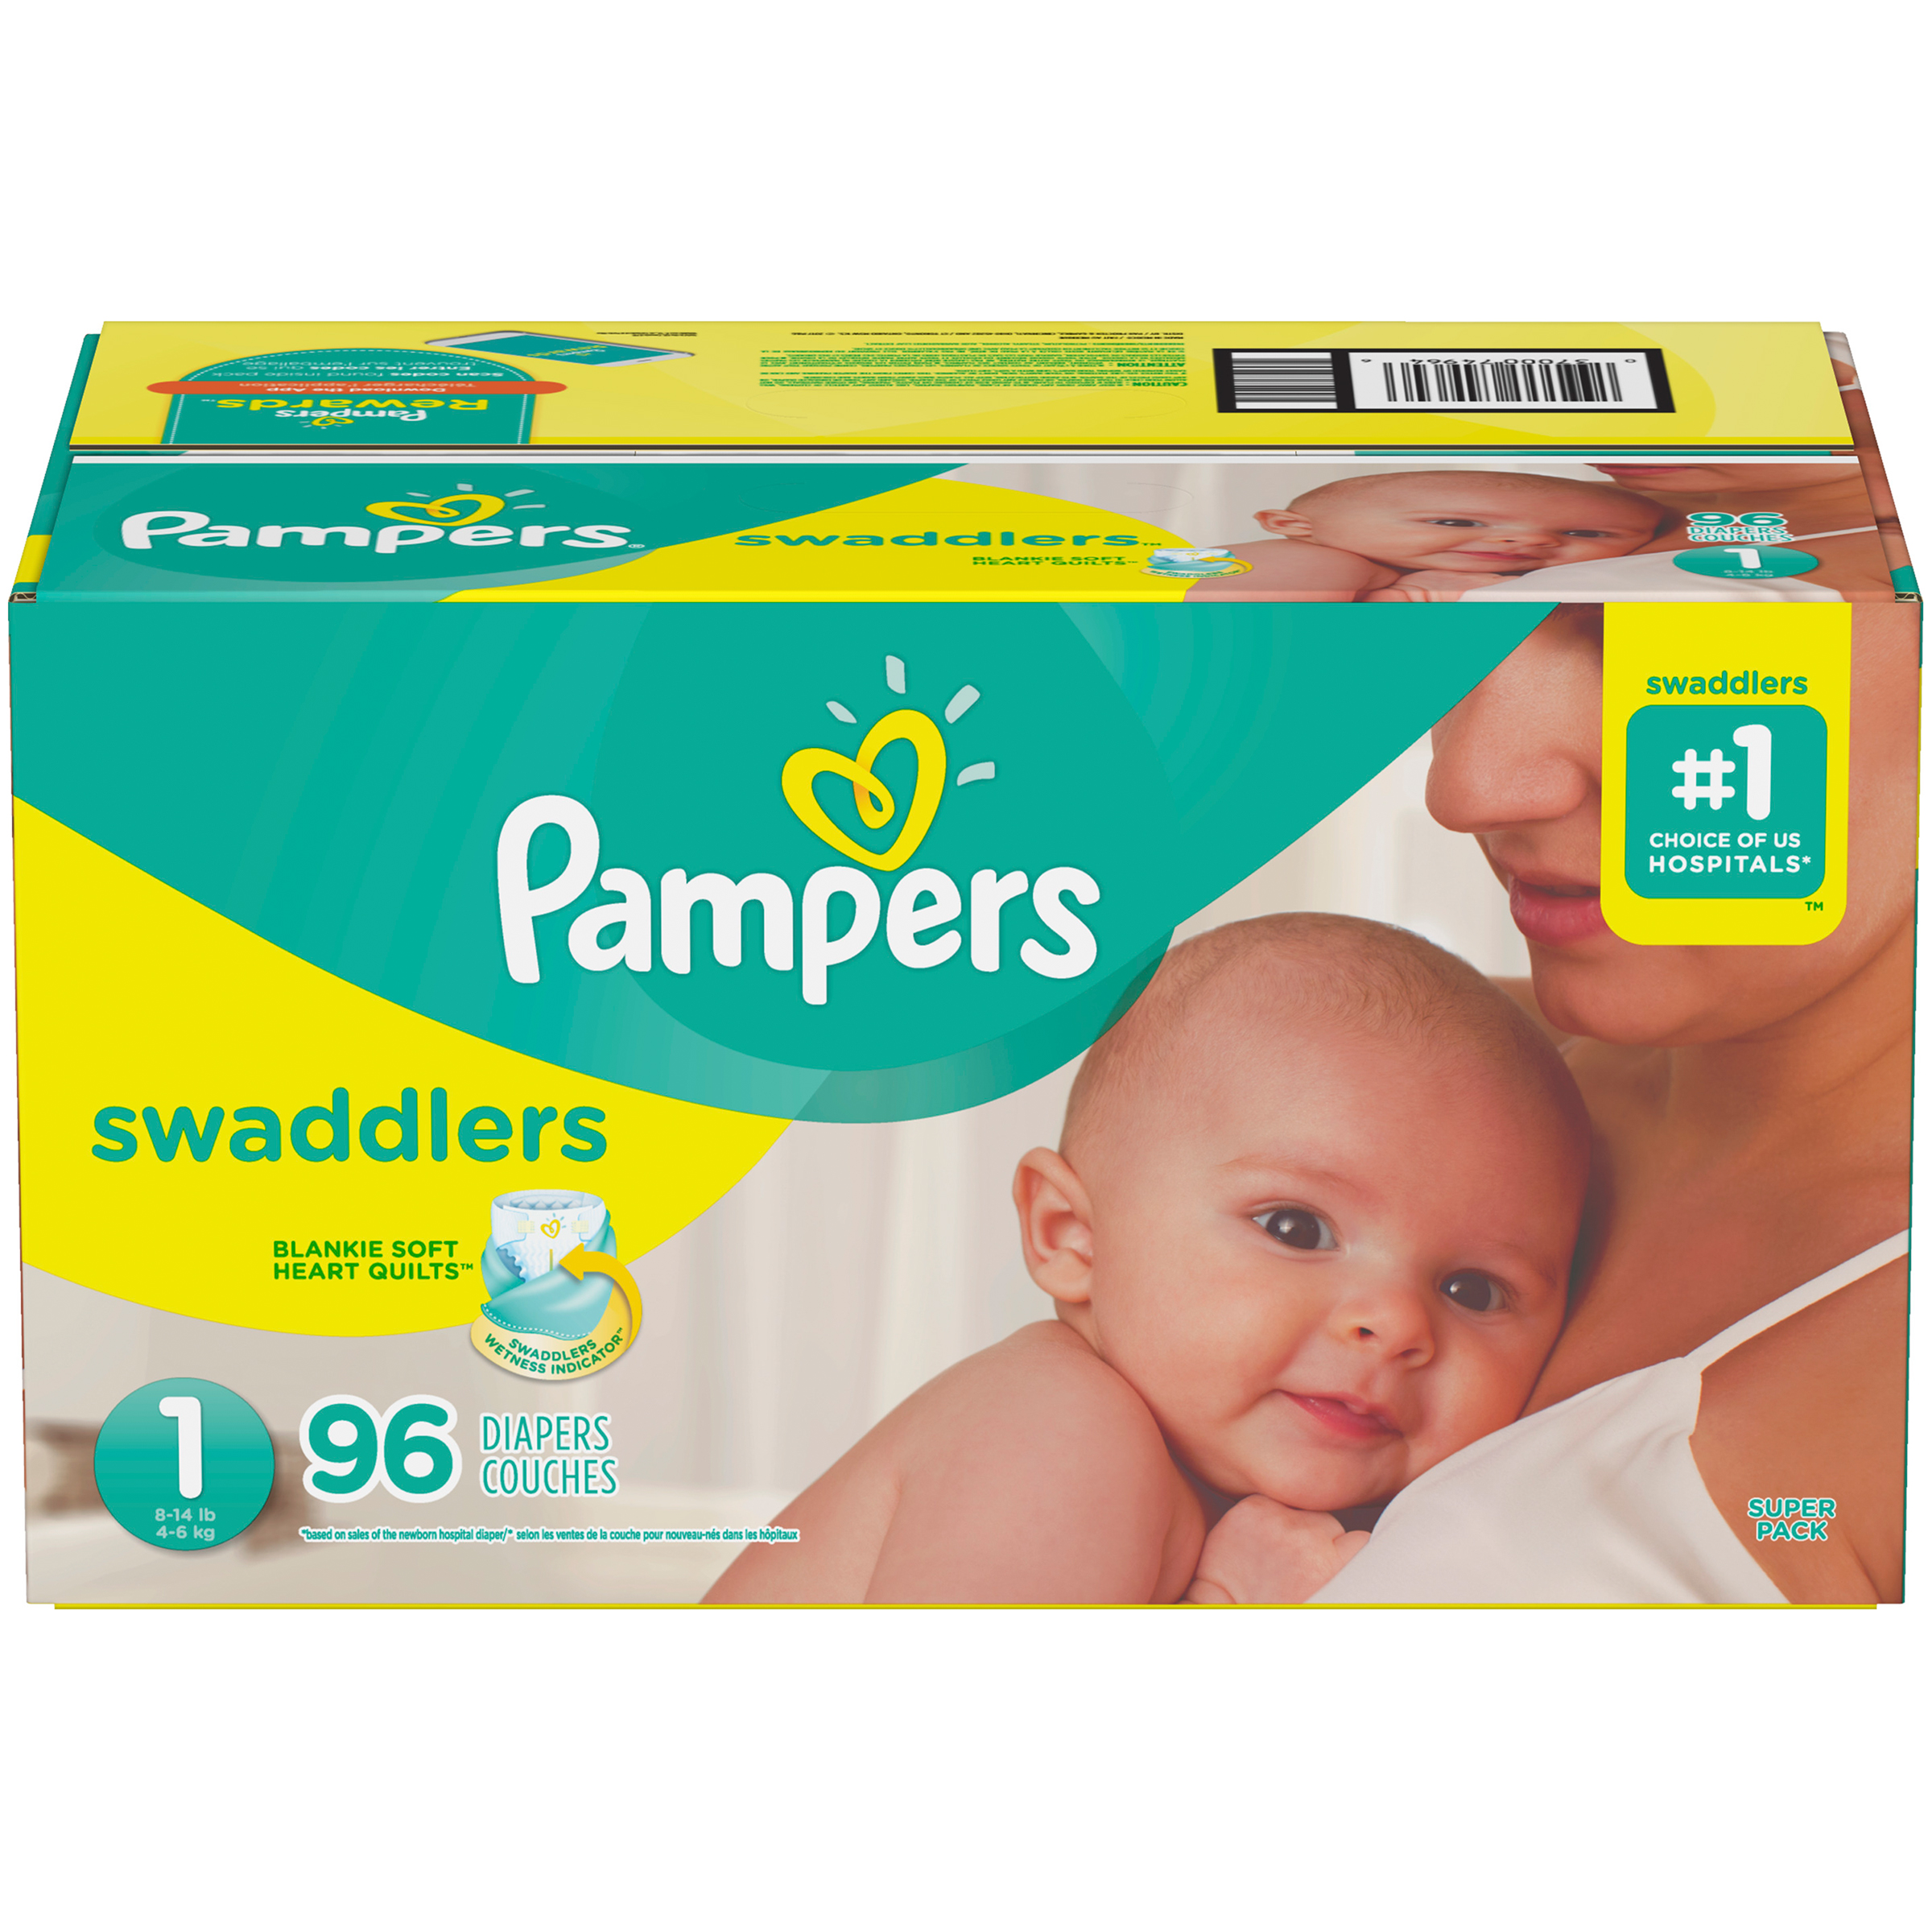 Pampers Diapers for sale in Everett, Massachusetts, Facebook Marketplace